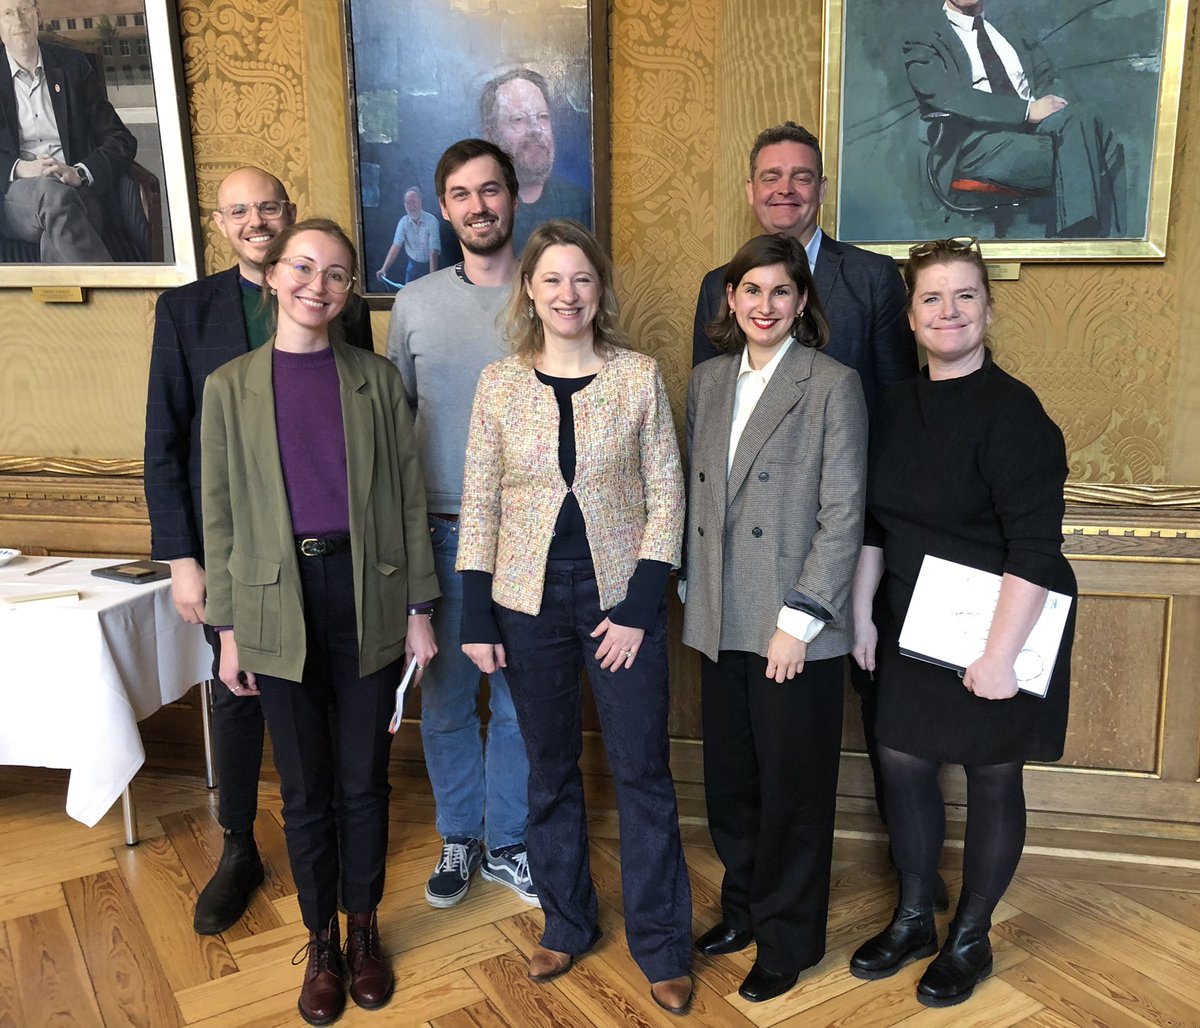 Inspiring lunch at City Hall today with the Lord Mayor of Copenhagen @SophieHAndersen, @RohlChristopher, and @zakiae & @JohanGalster from @wedodemocracy.

Thank you for hosting @DemocracyNext to talk about the next democratic paradigm and share with us your ambitious plans!